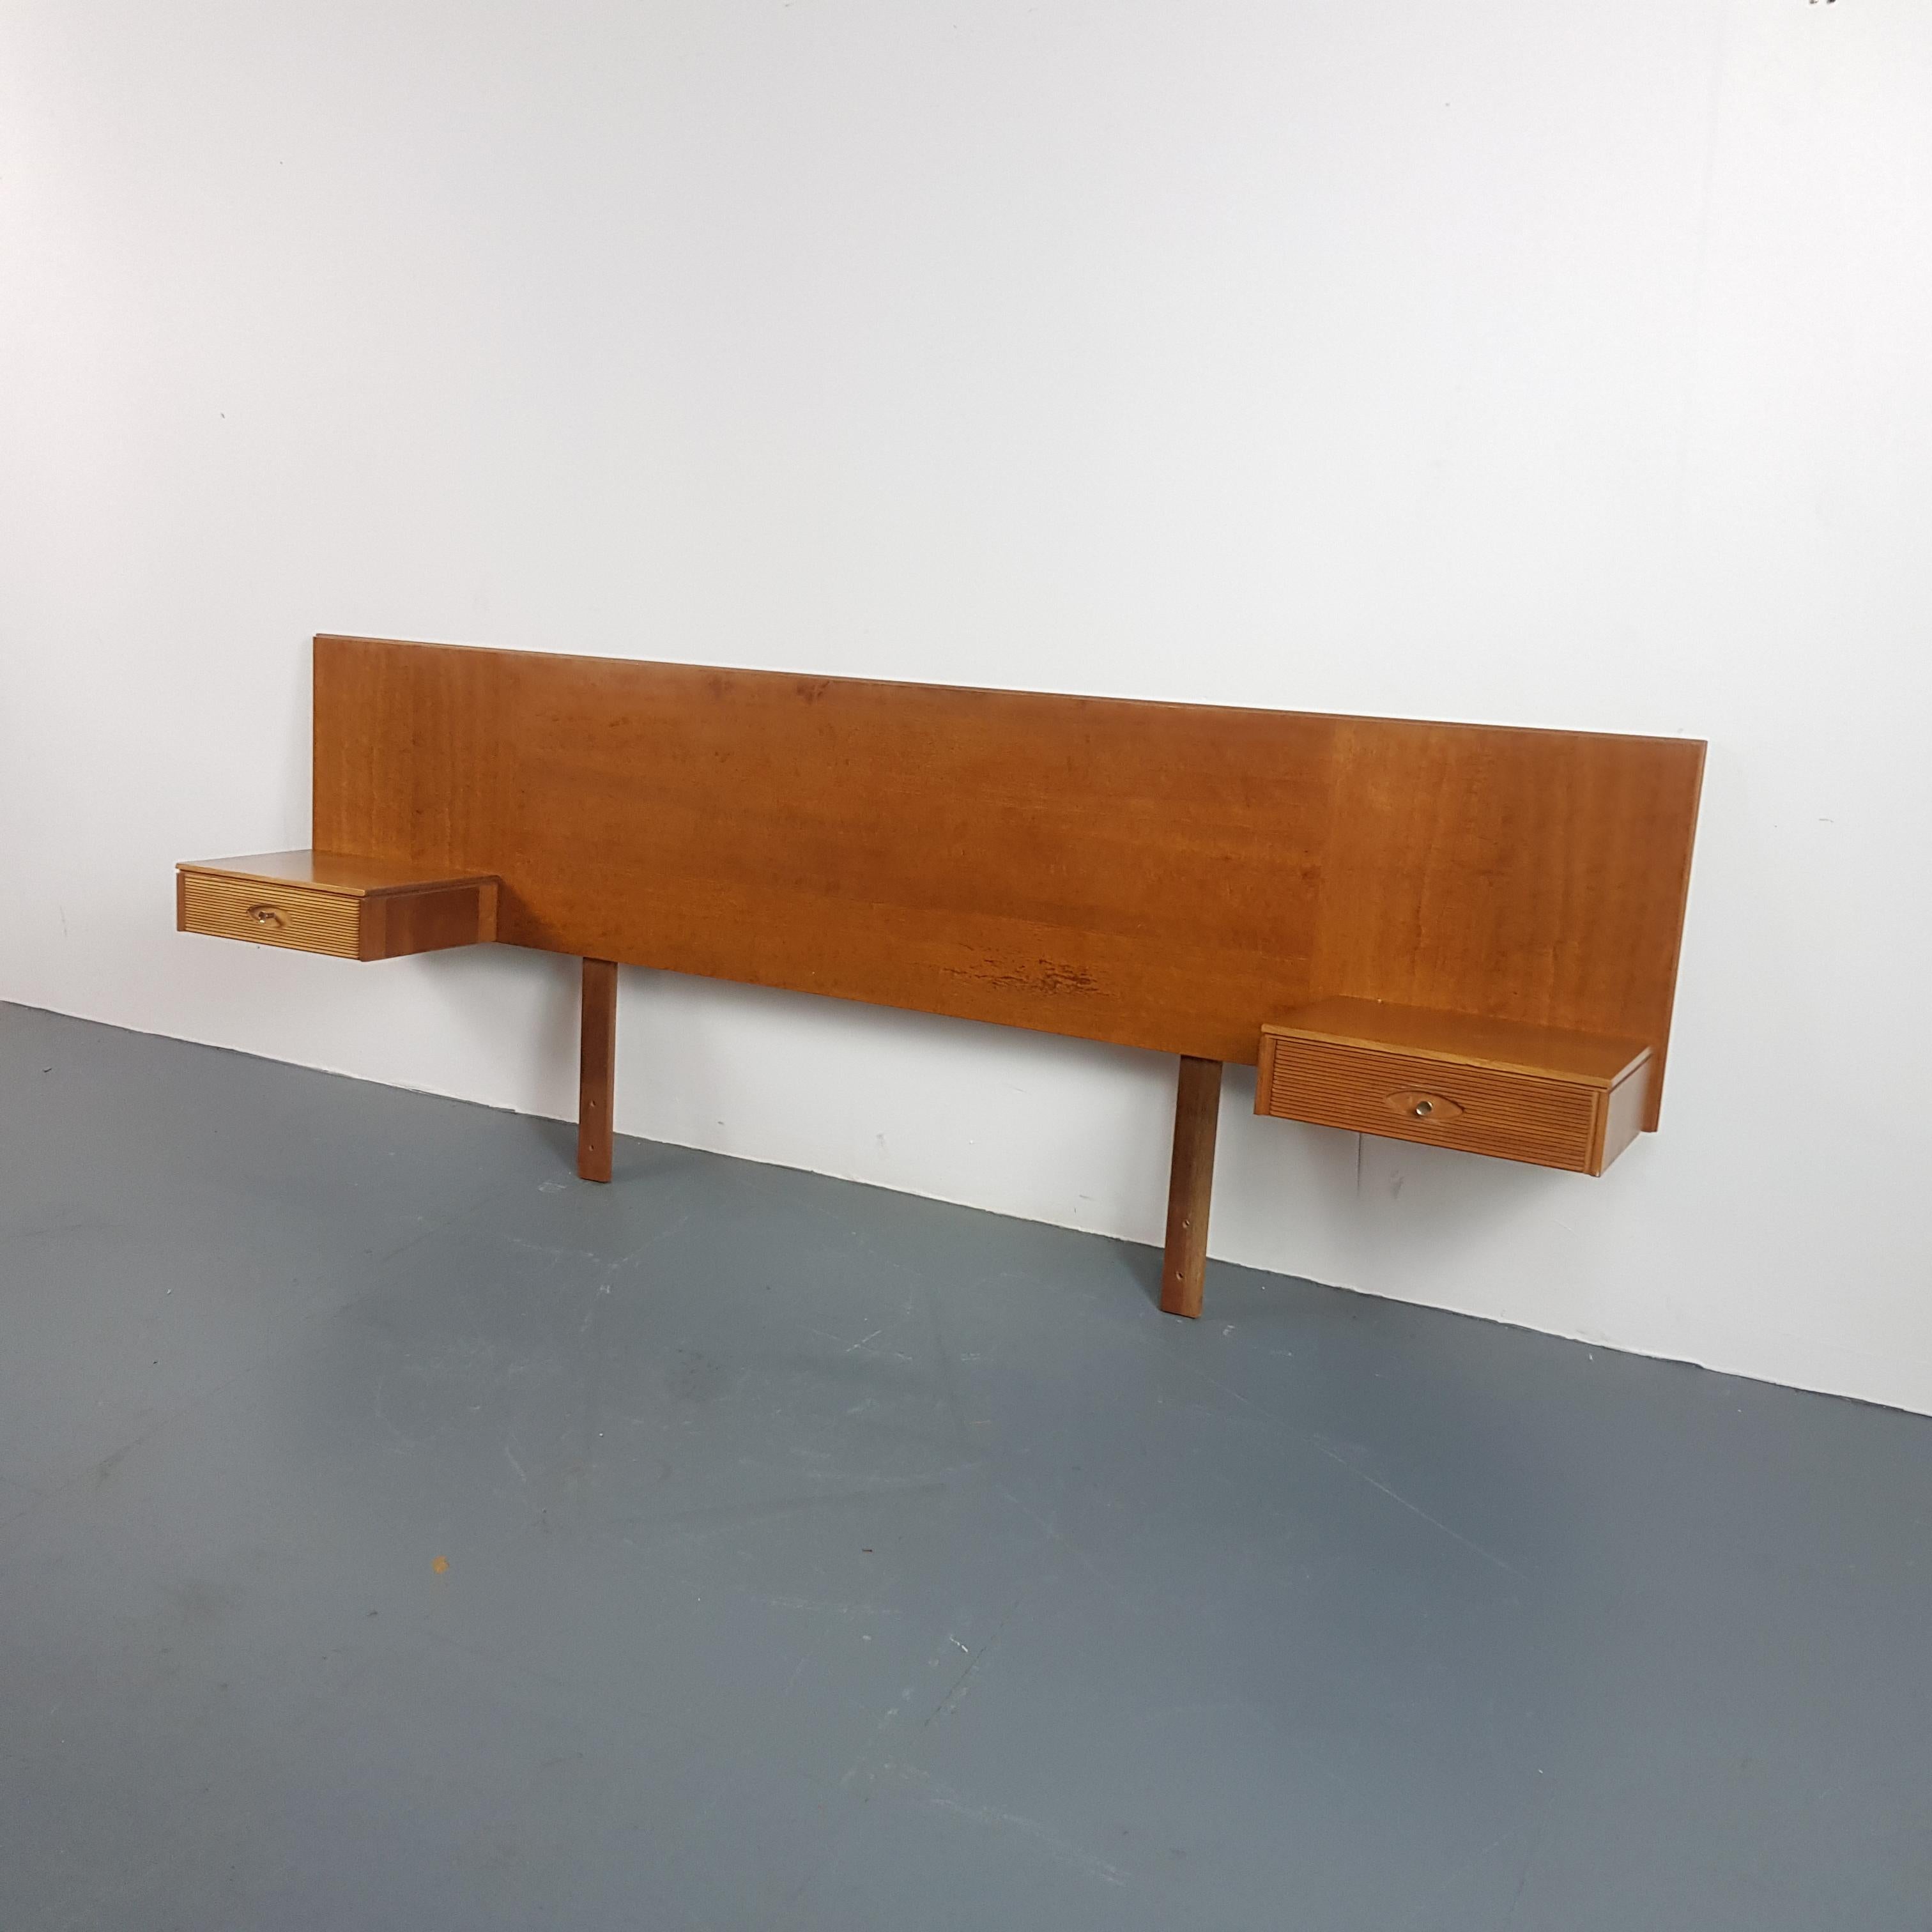 Lovely midcentury headboard with built-in bedside drawers made from teak, designed by Robert Heritage for Archie Shine. With signature reeded drawer fronts.

Approximate dimensions:

Width: 230cm

Depth: 32cm

Height: 89cm

Drawers: 35cm x